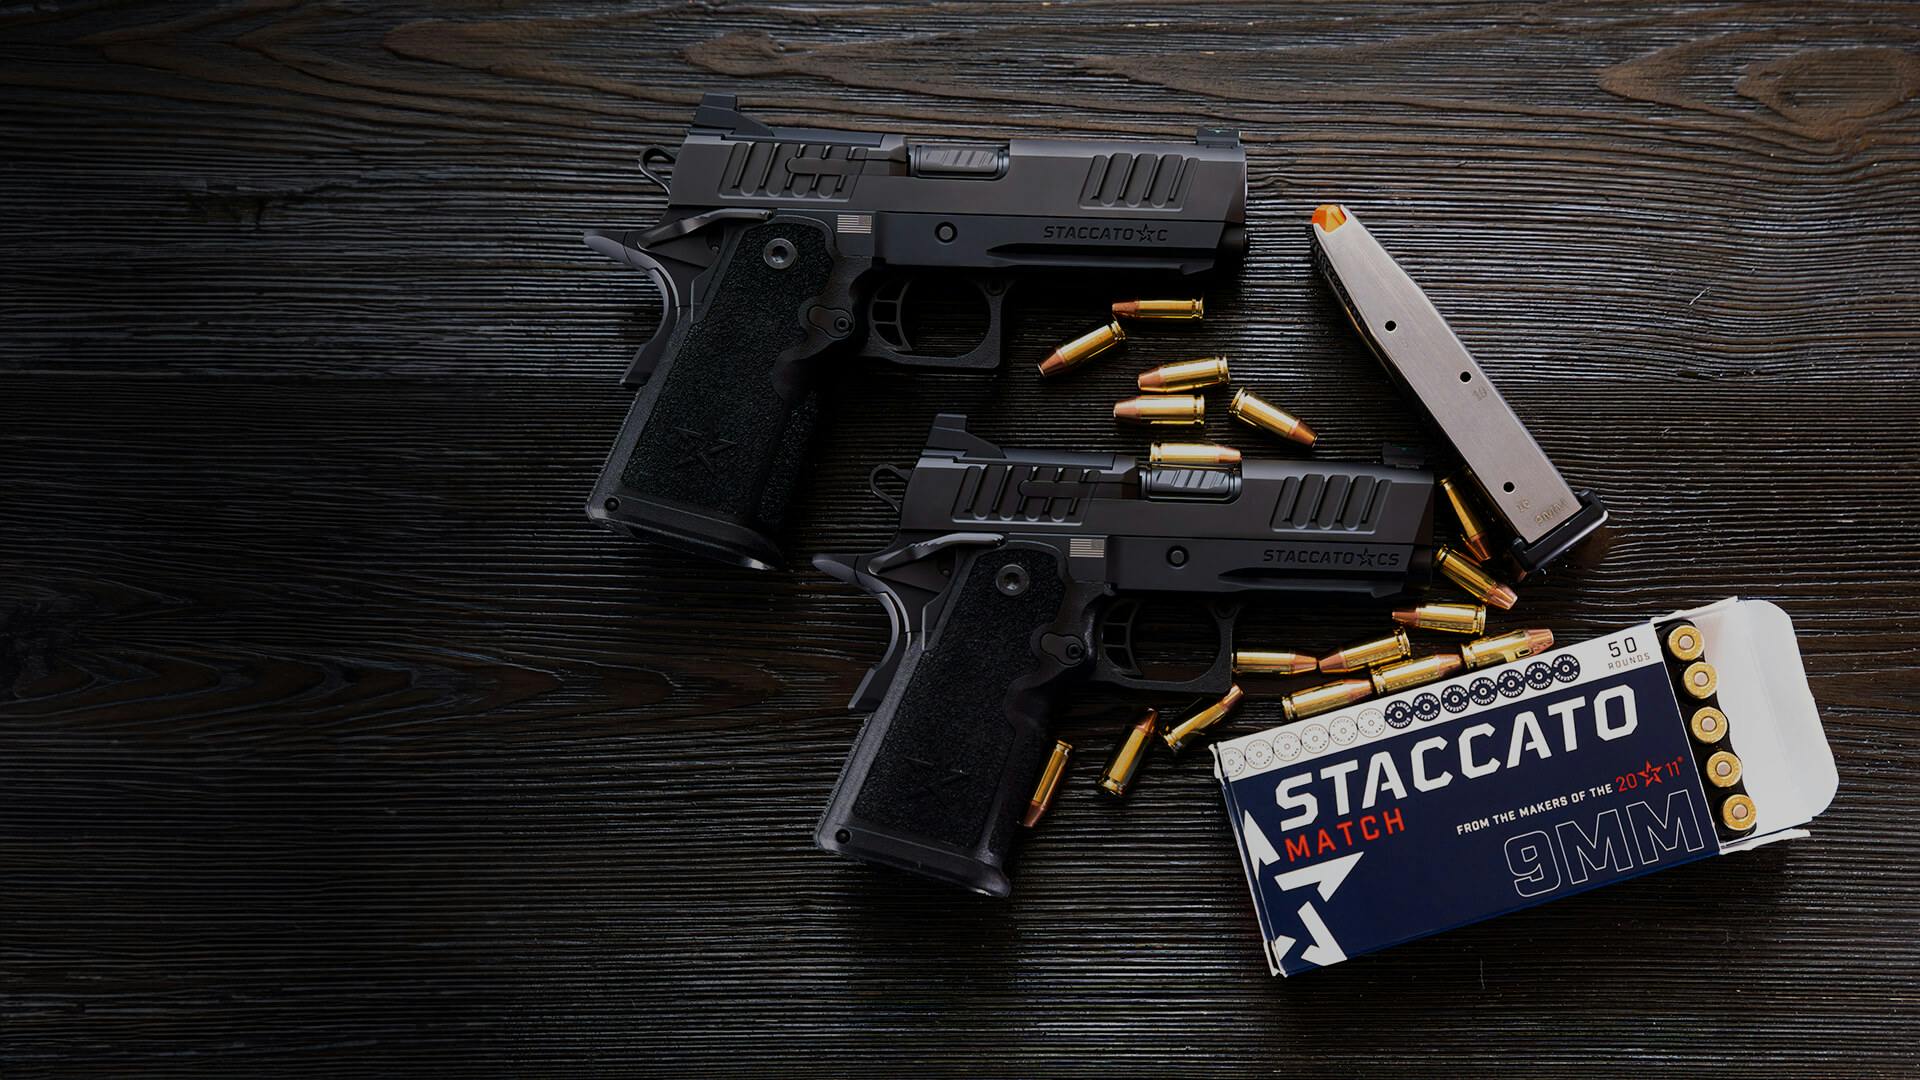 Staccato 2011 Pistols, Built Handguns, Accessories. & 2011 For Heroes. - Staccato